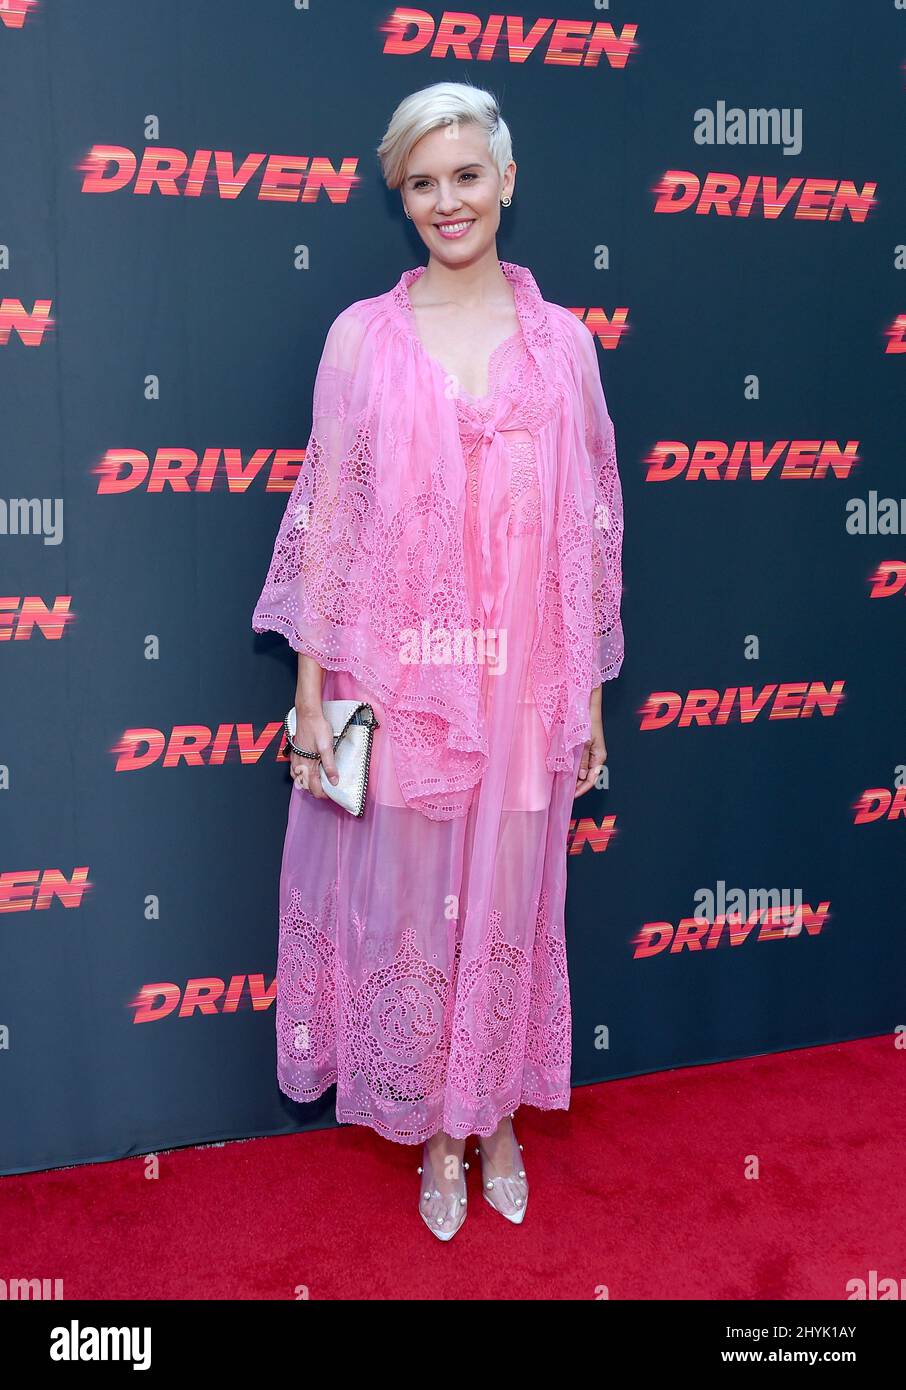 Maggie Grace attending the premiere of Driven, in Los Angeles, California Stock Photo